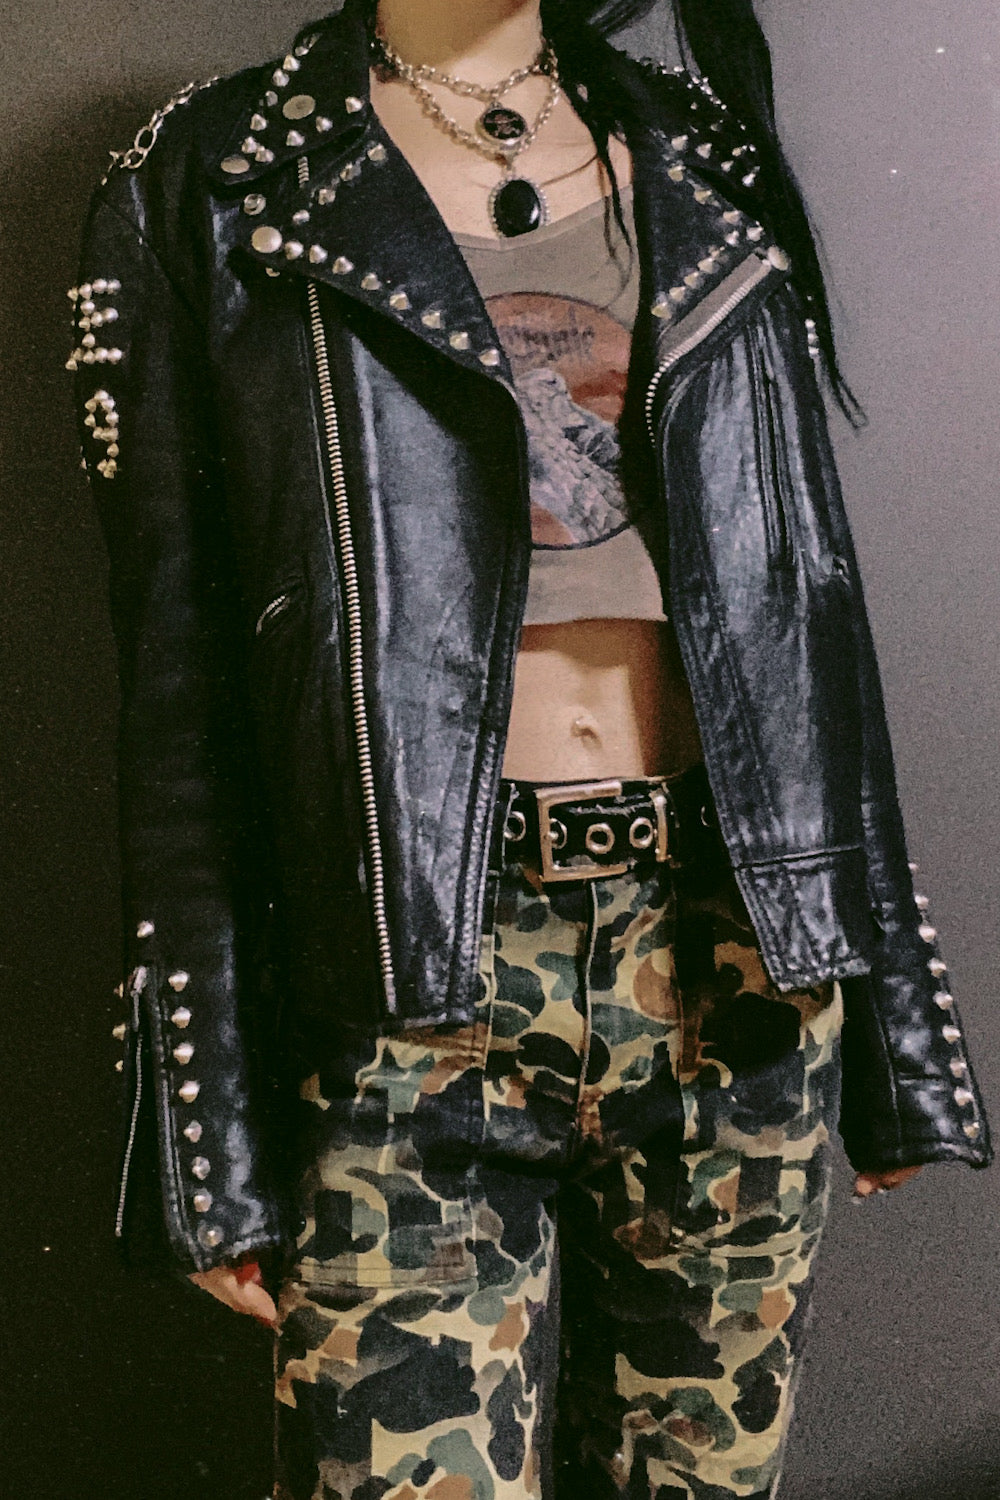 Ace 59 Vintage Studded Leather Jacket (Customized by hand in London)